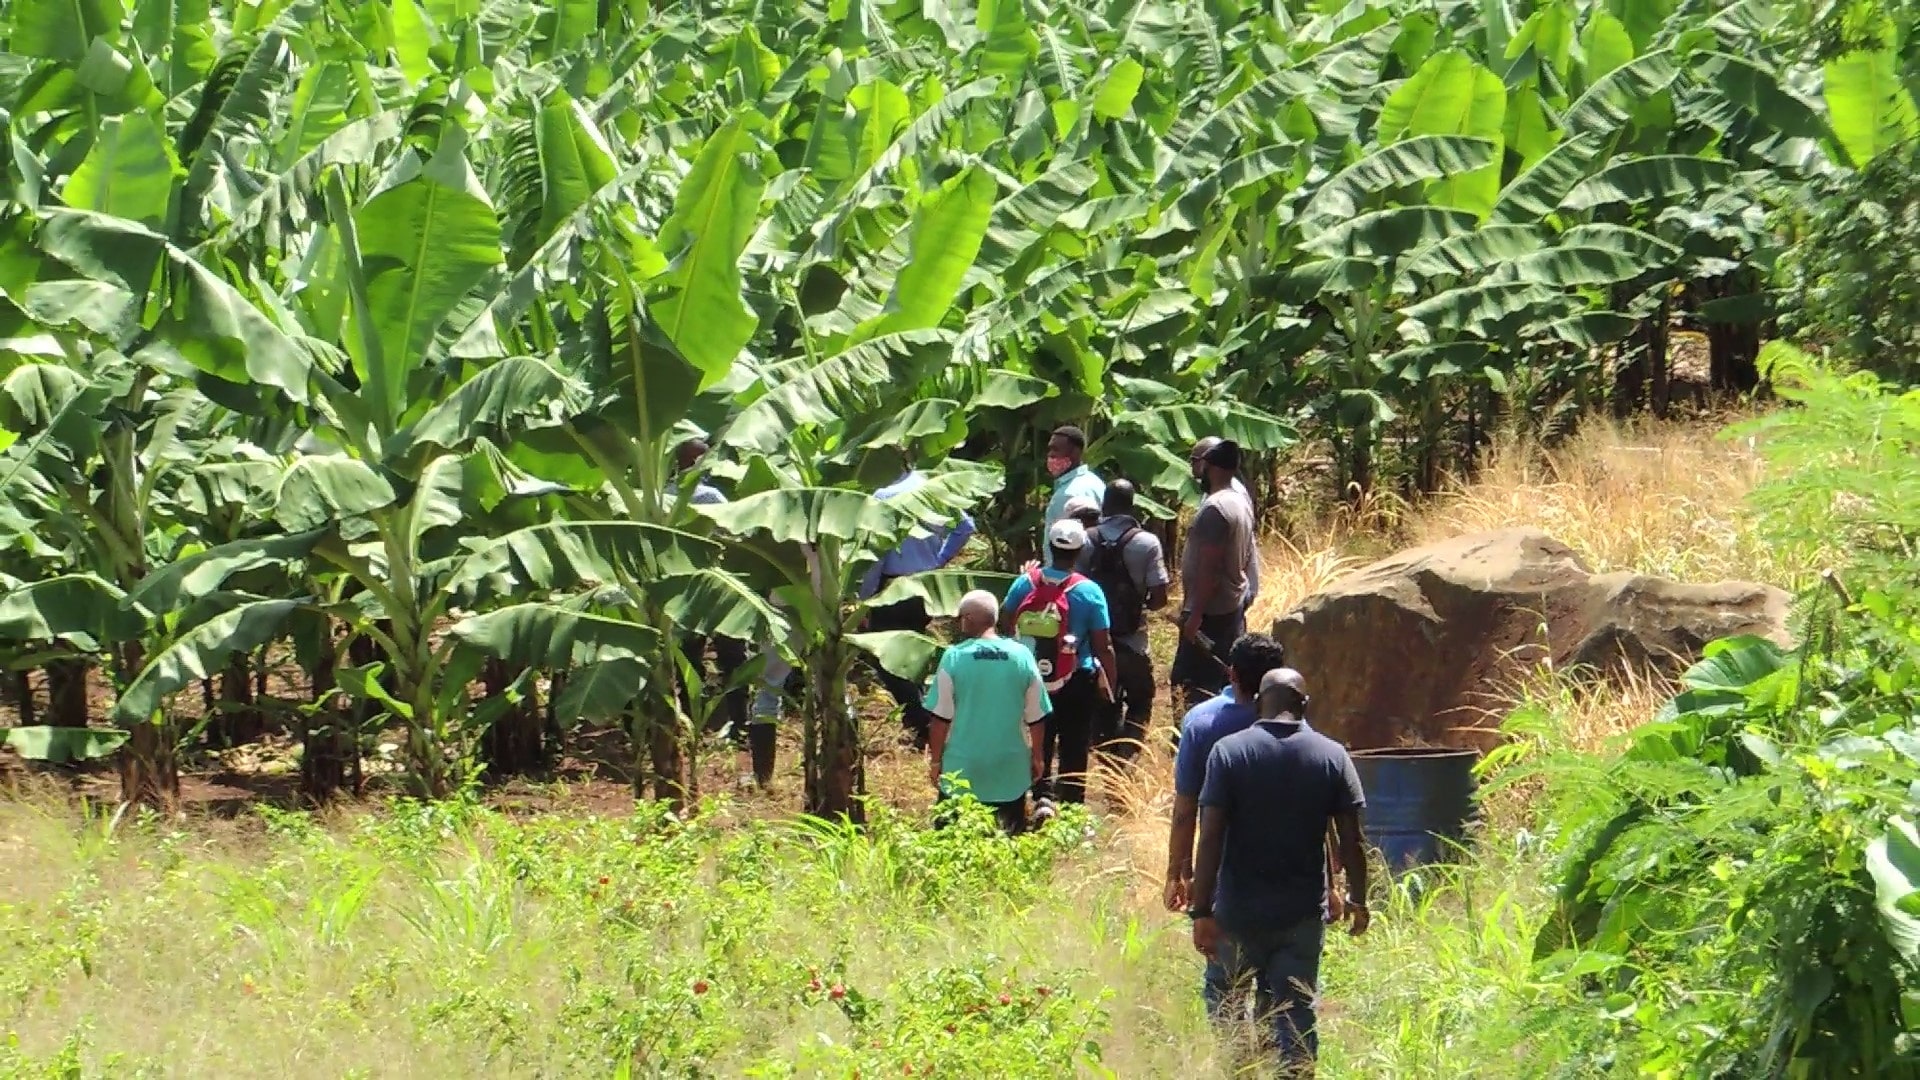 Pest And Disease Management In Banana Production - REAL FM GRENADA